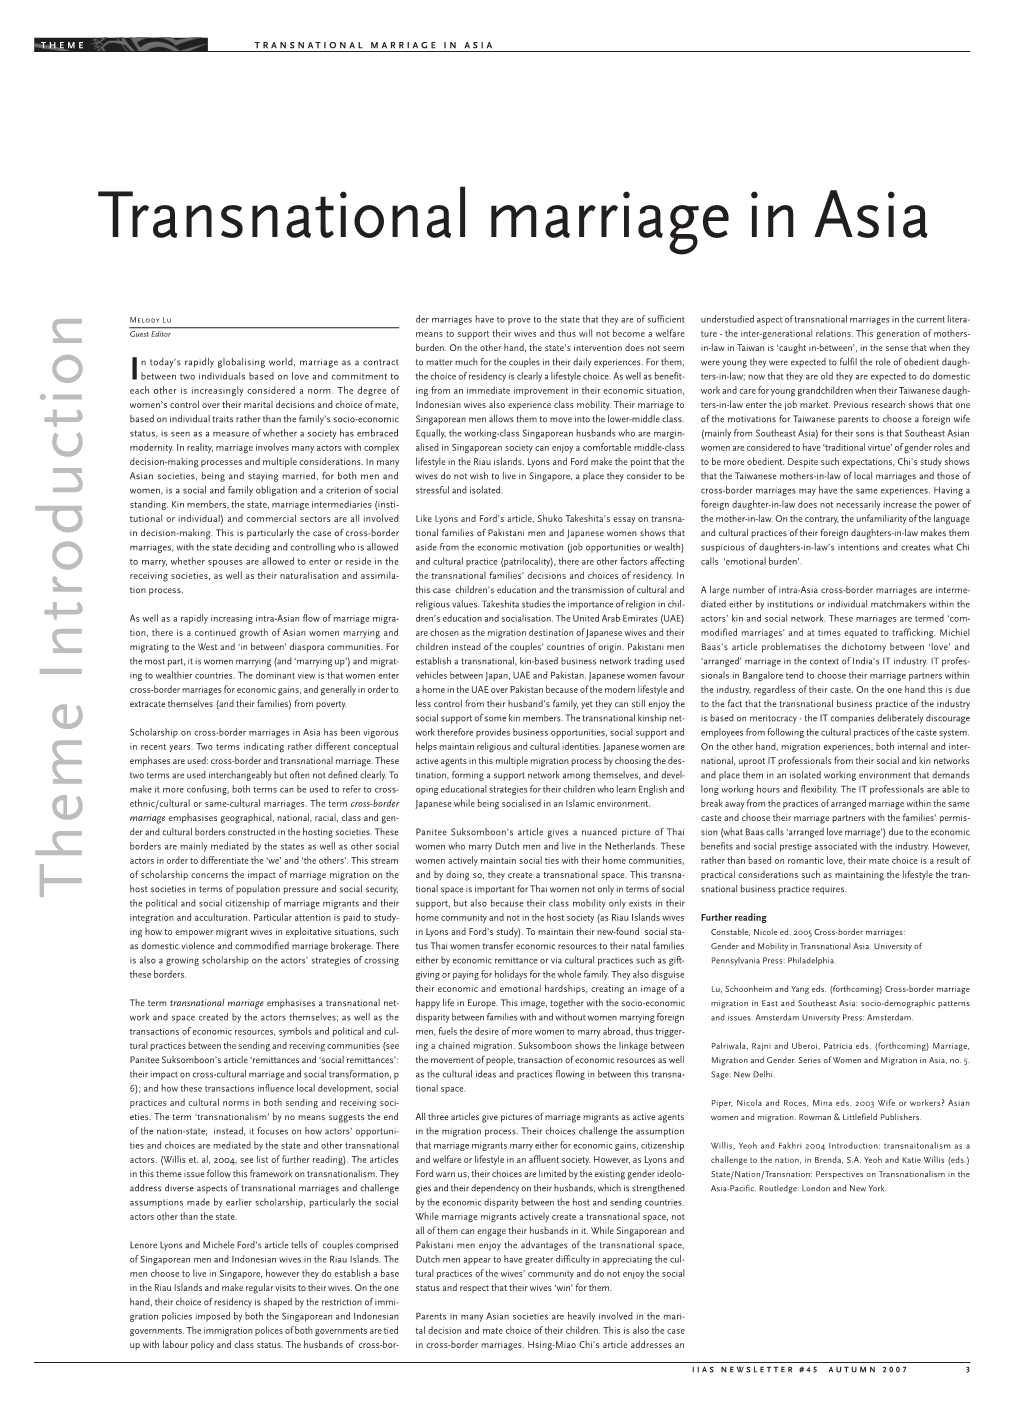 Transnational Marriage in Asia